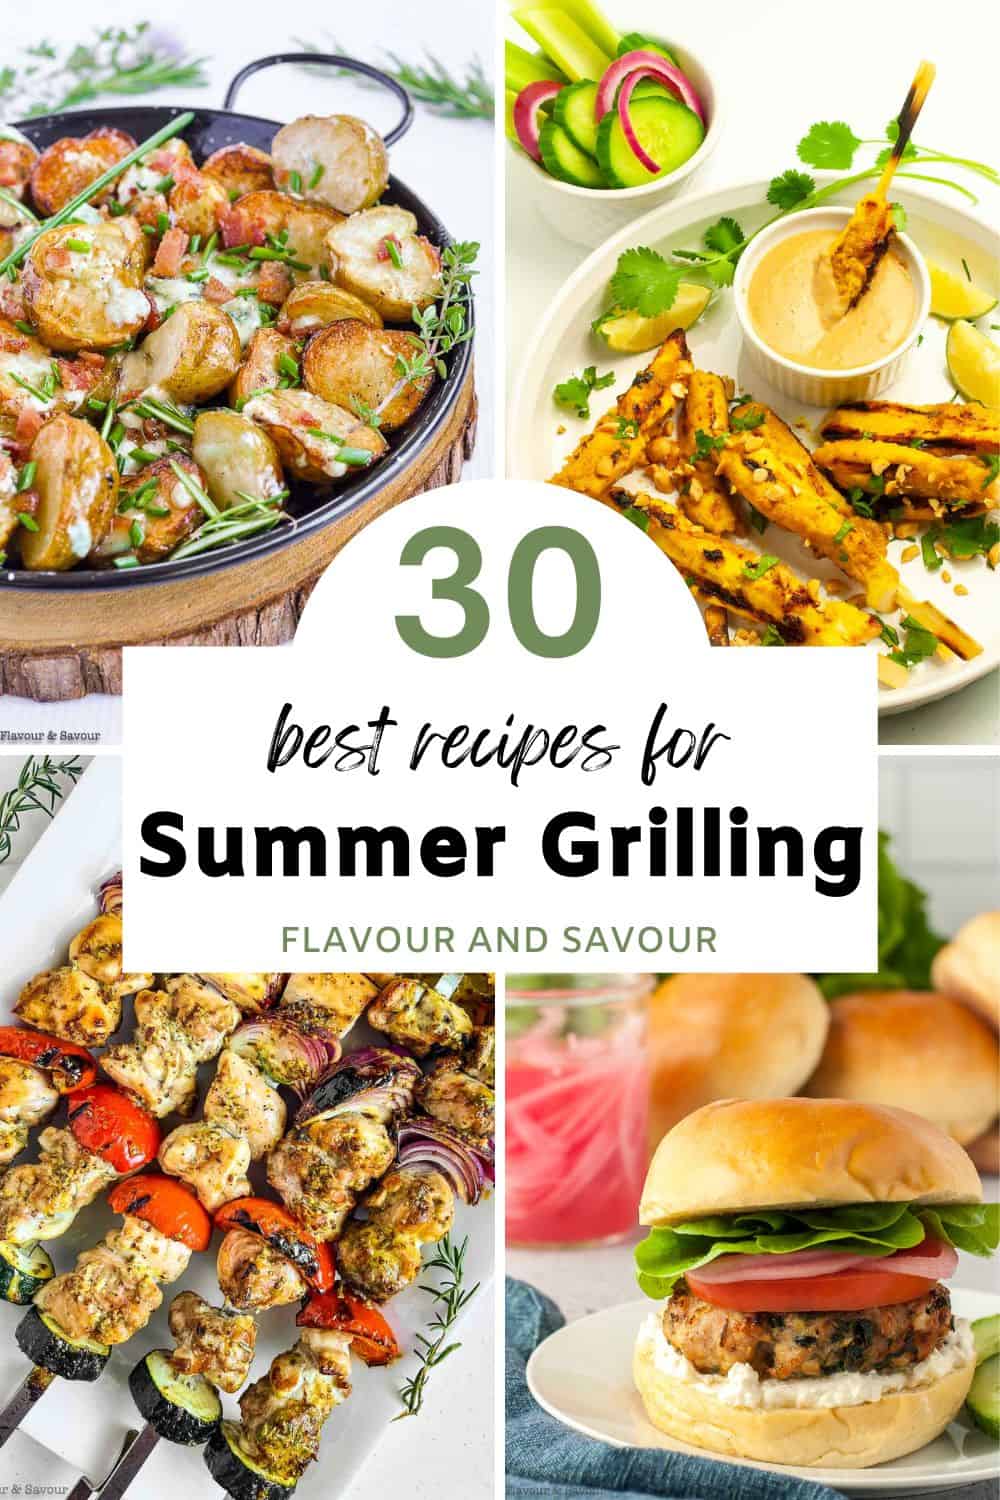 Collage image with text overlay for 30 best recipes for summer grilling.